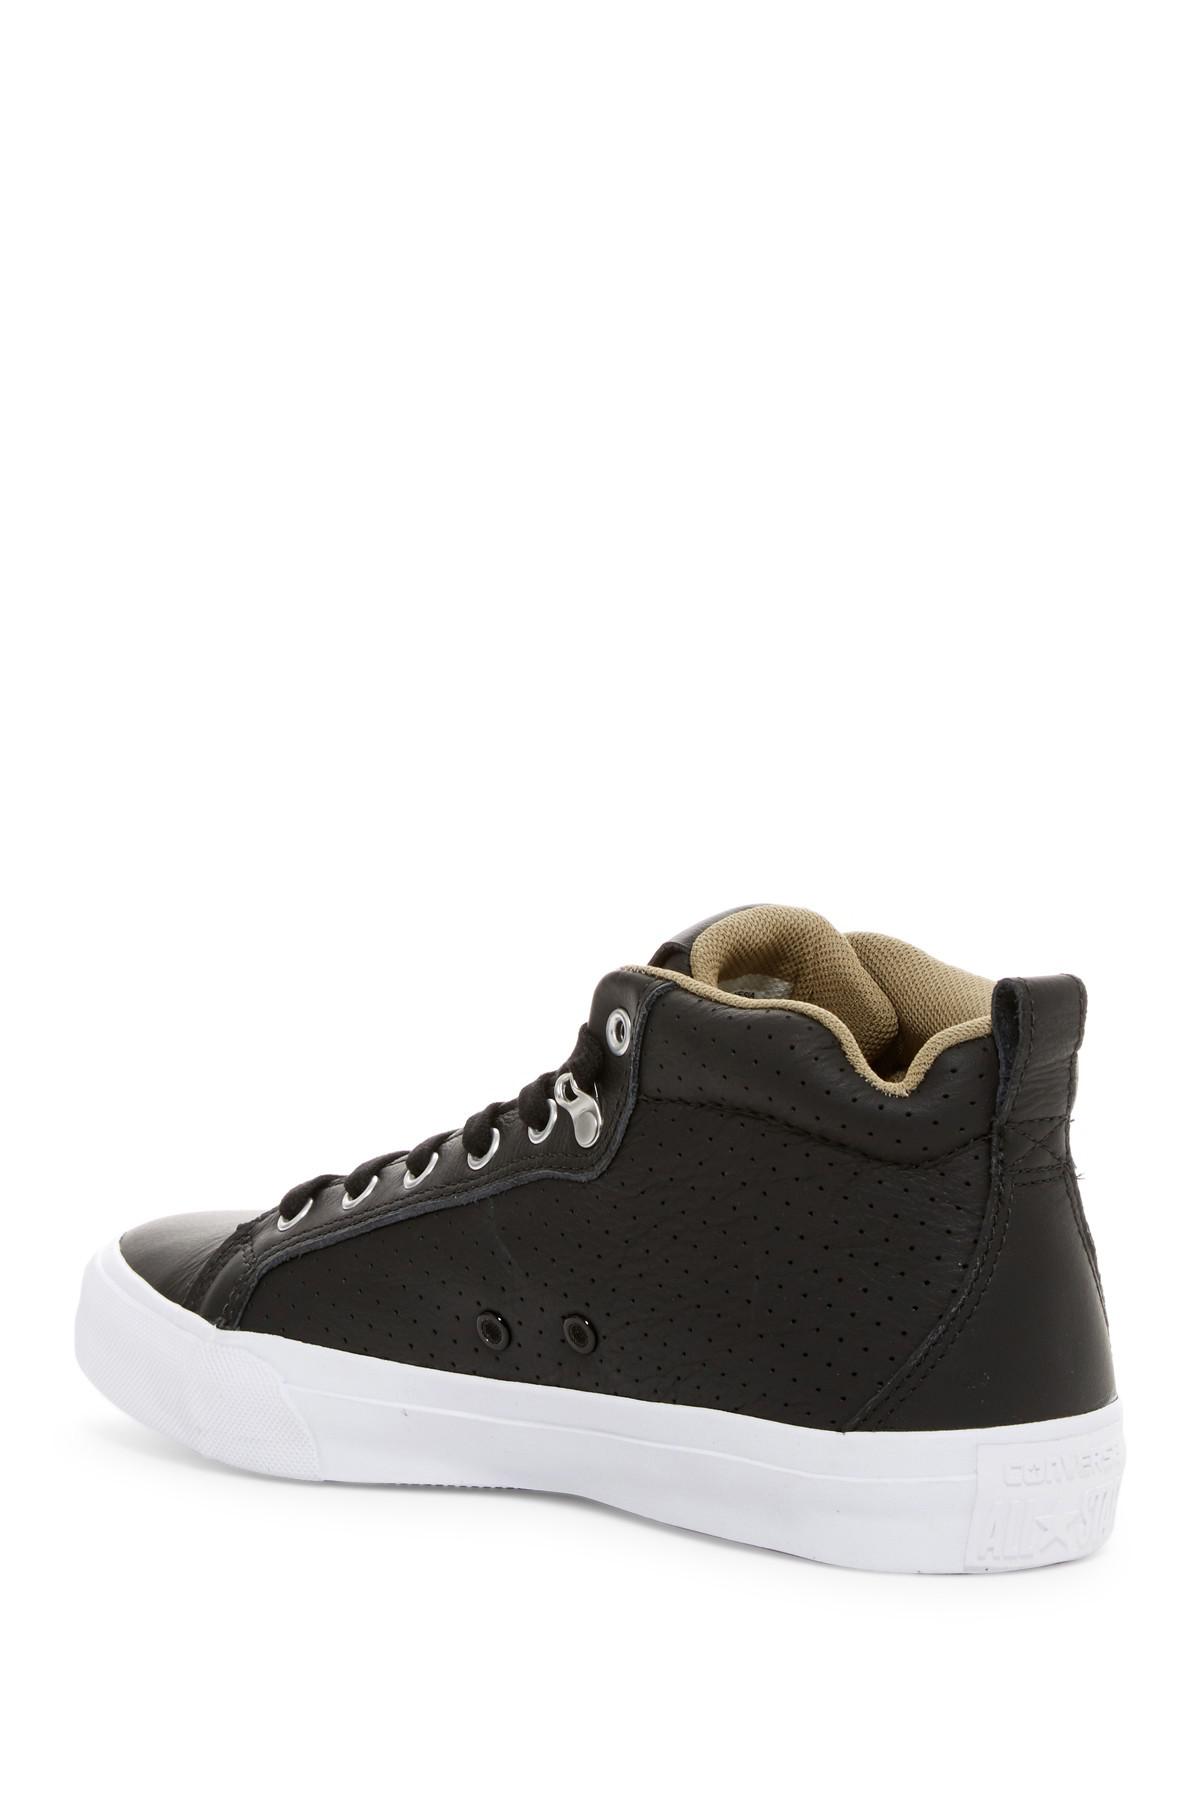 Converse Leather Chuck Taylor All Star Fulton Mid Sneaker (unisex) in Black  for Men - Lyst